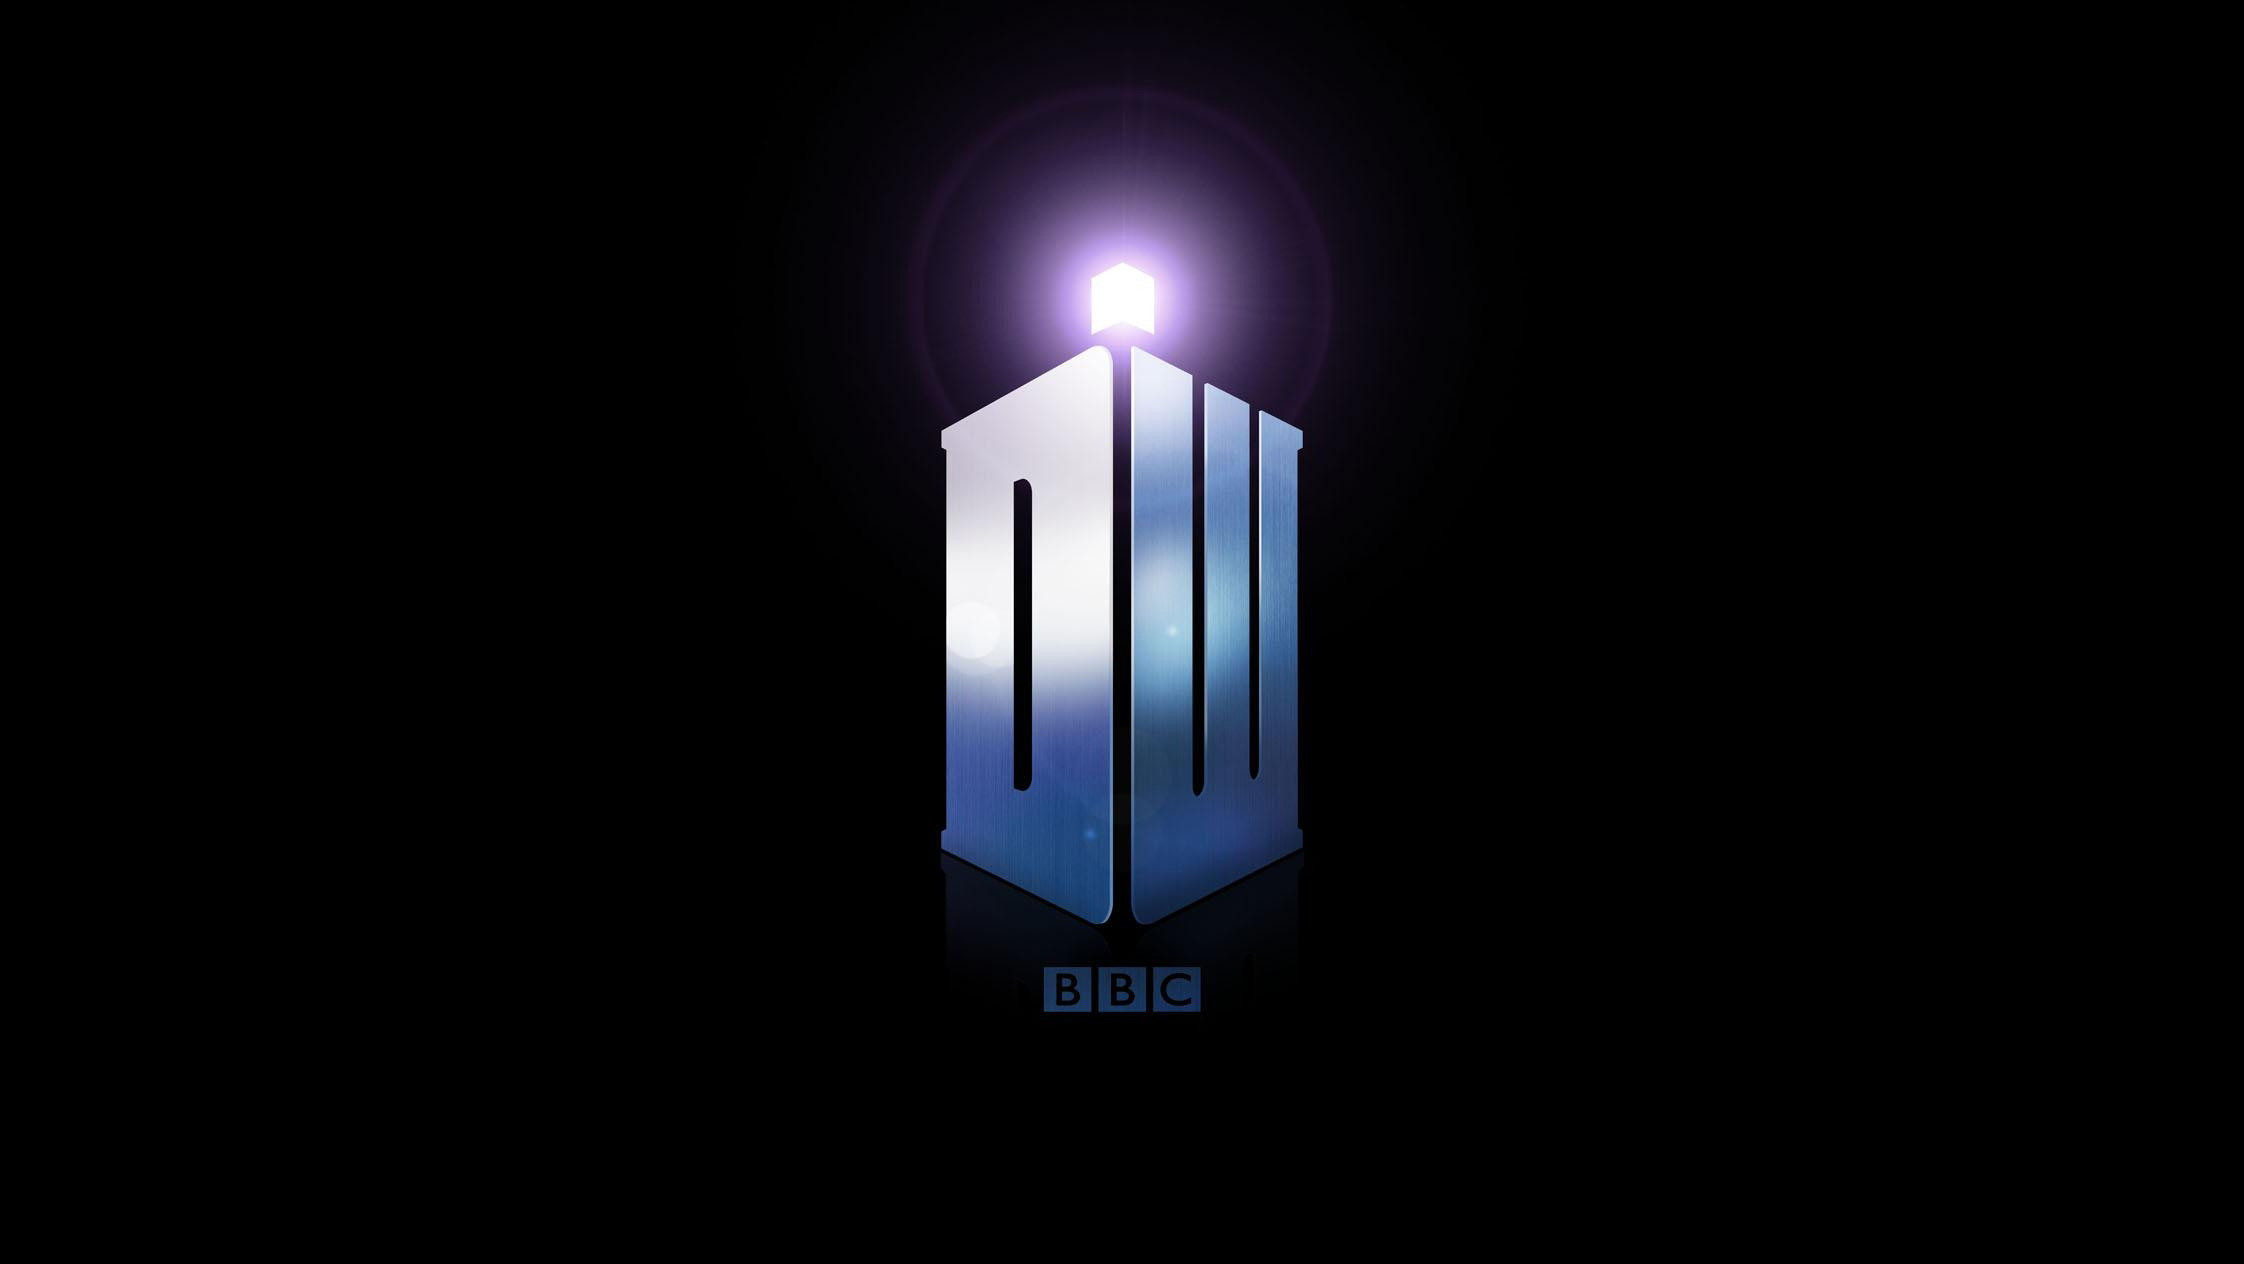 2244x1264 BROWSE doctor who iphone wallpaper tardis- HD Photo Wallpaper .